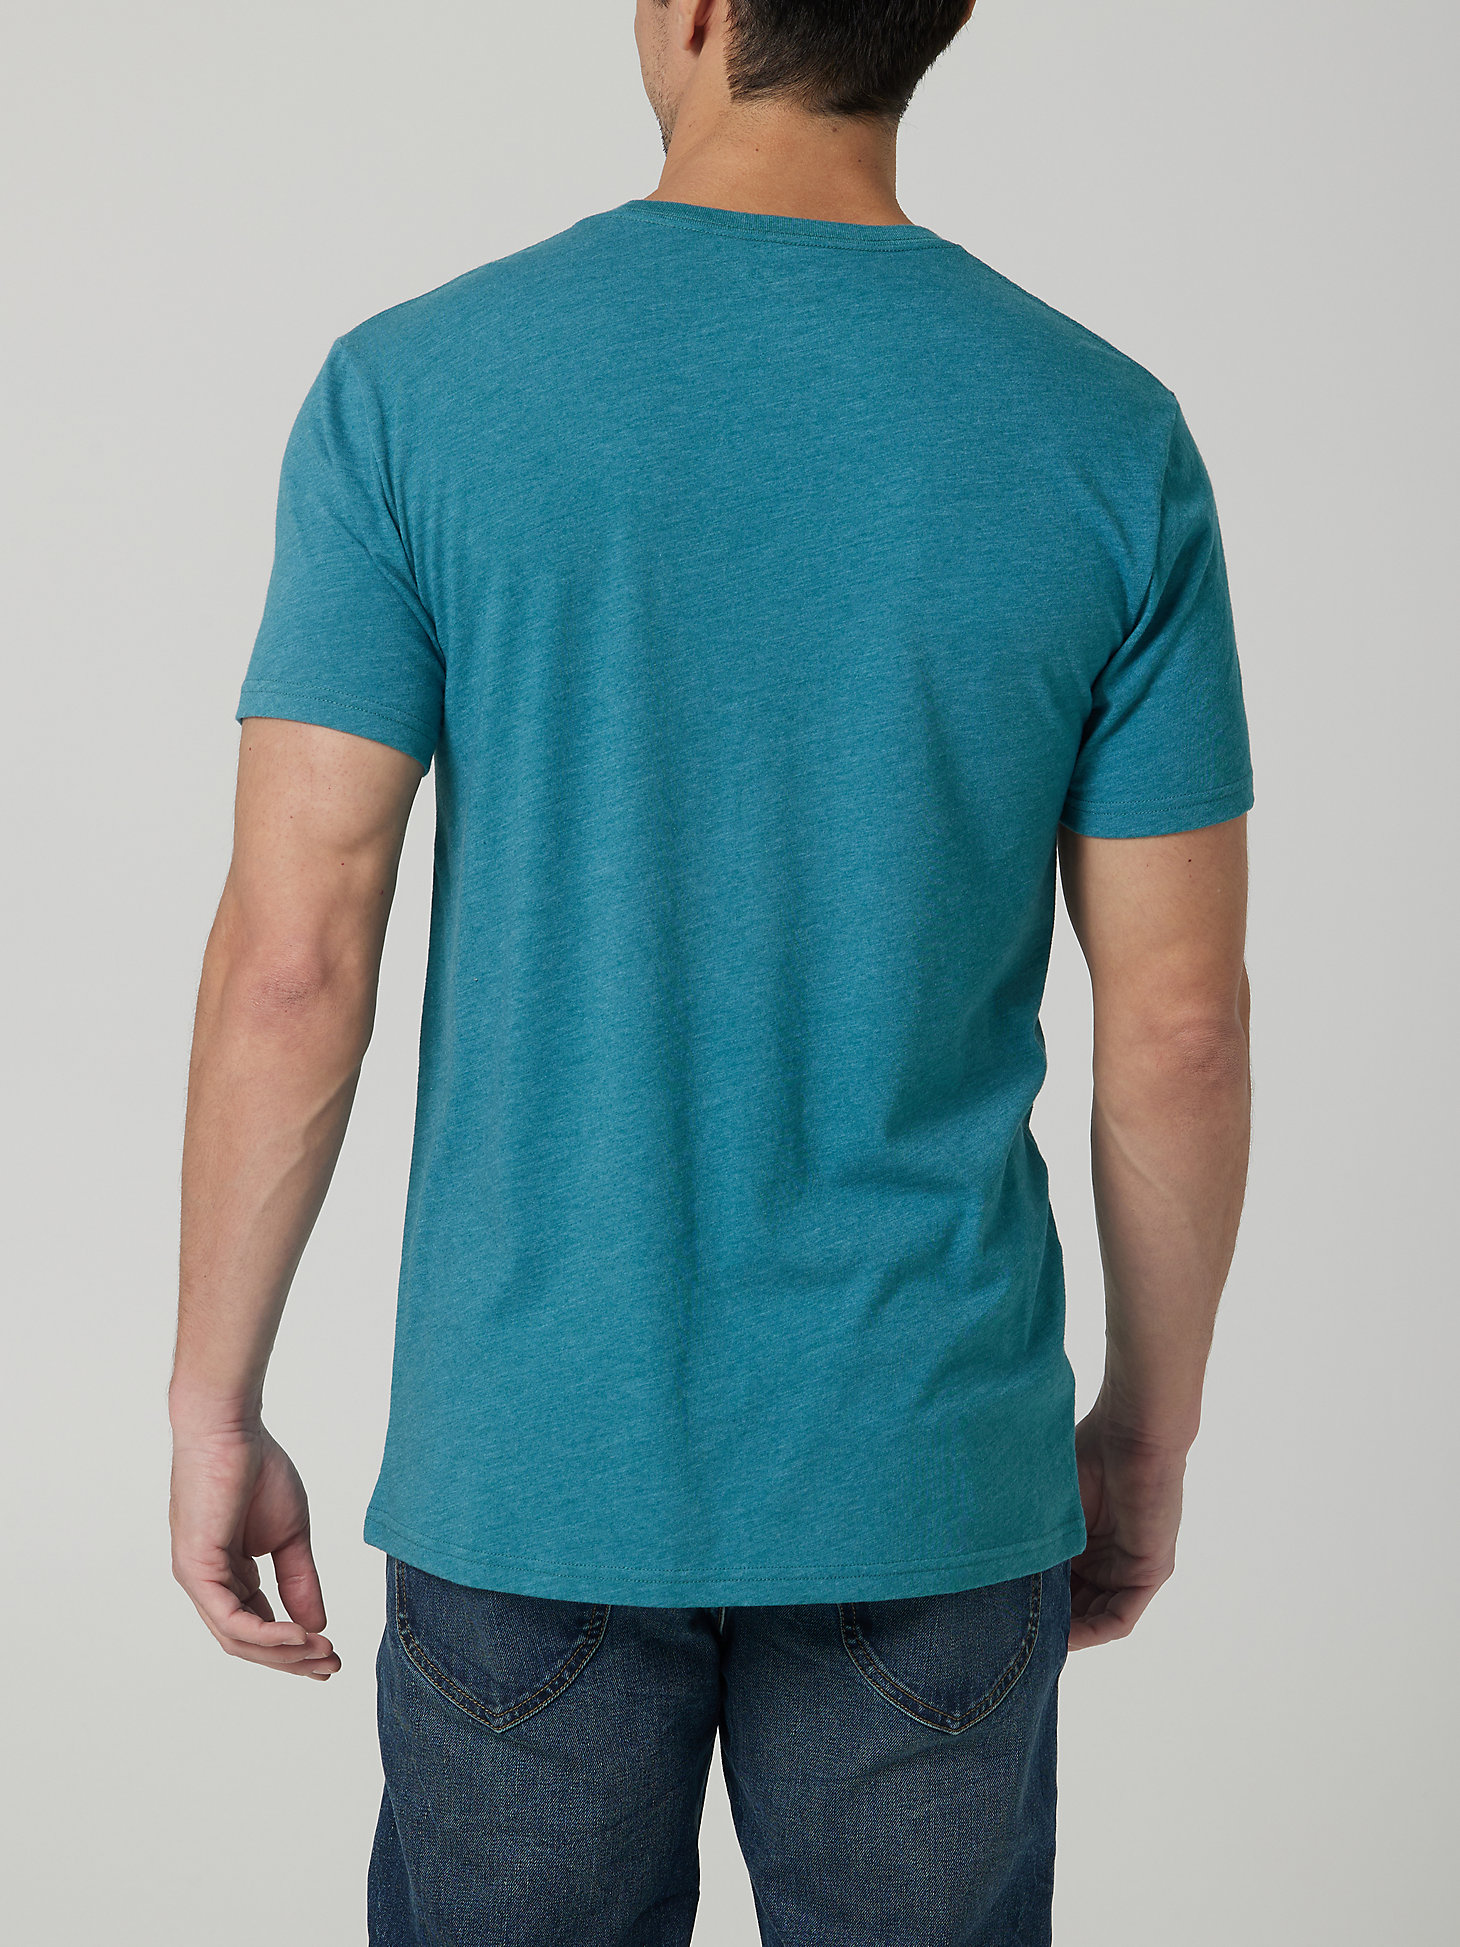 Men's Great Lakes Race Graphic Tee in Teal Heather alternative view 1